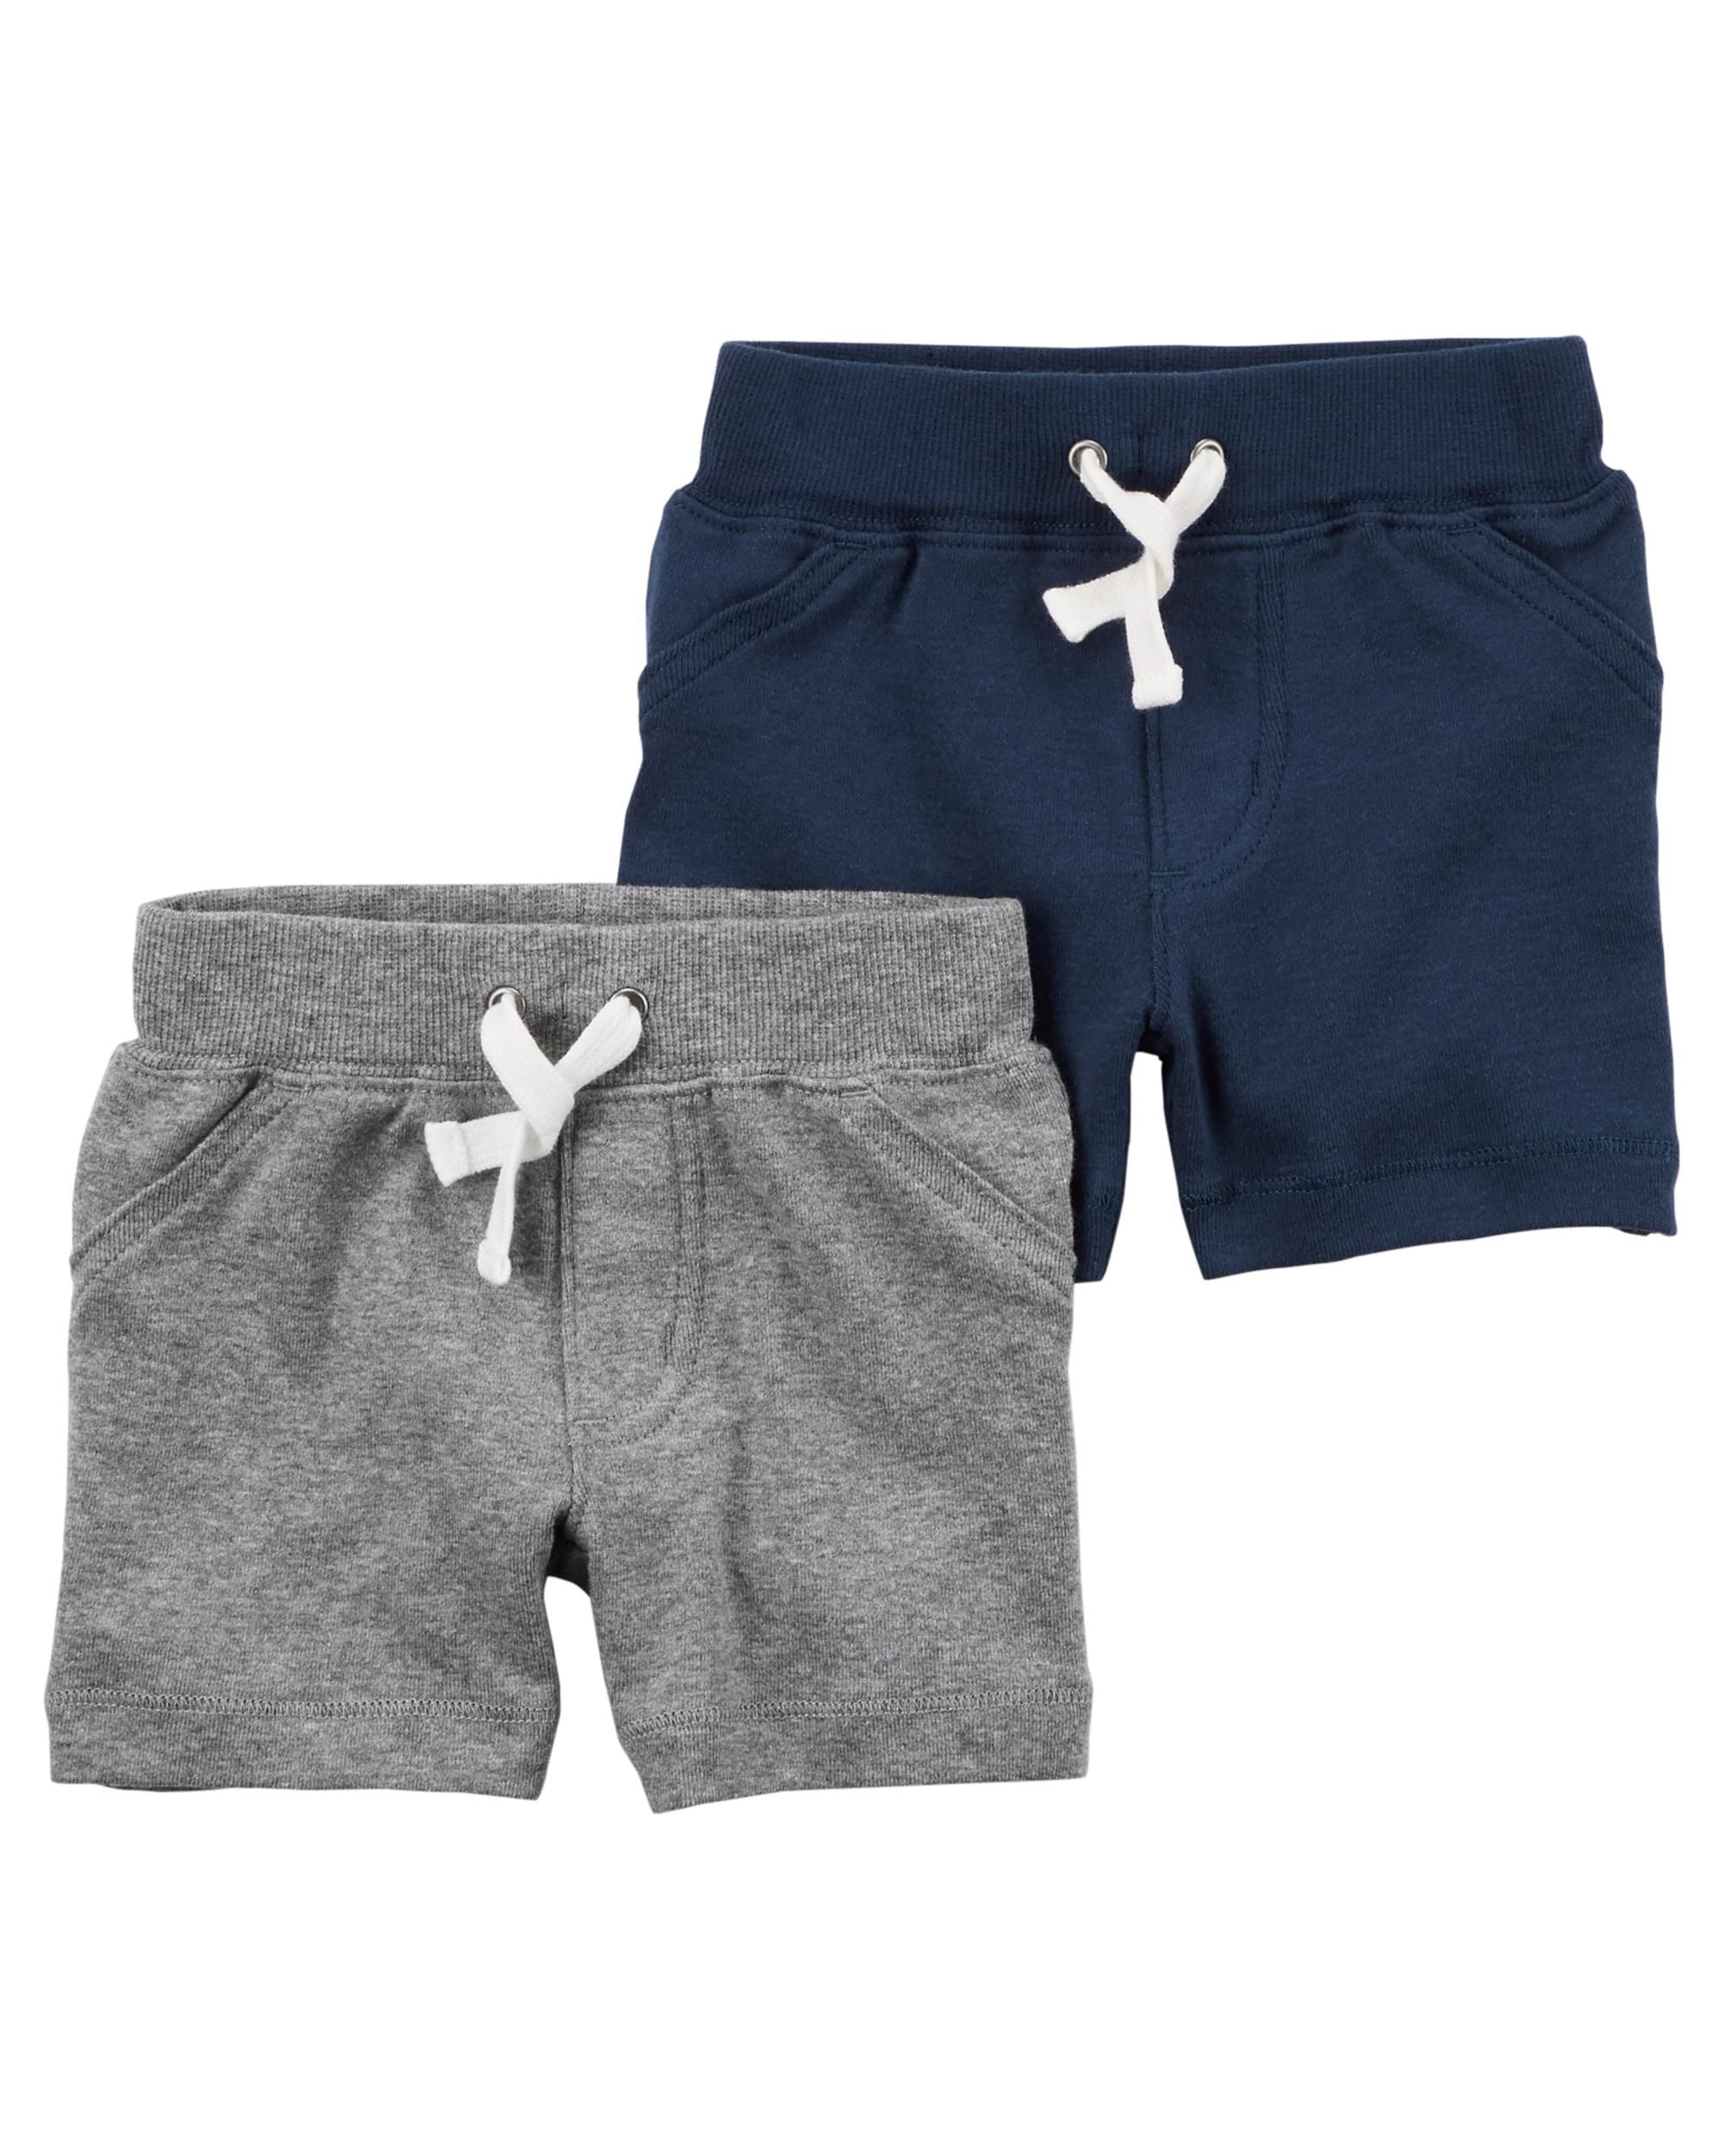 Carters Toddler Boys 2 Pack Pull-On French Terry Soft Shorts 